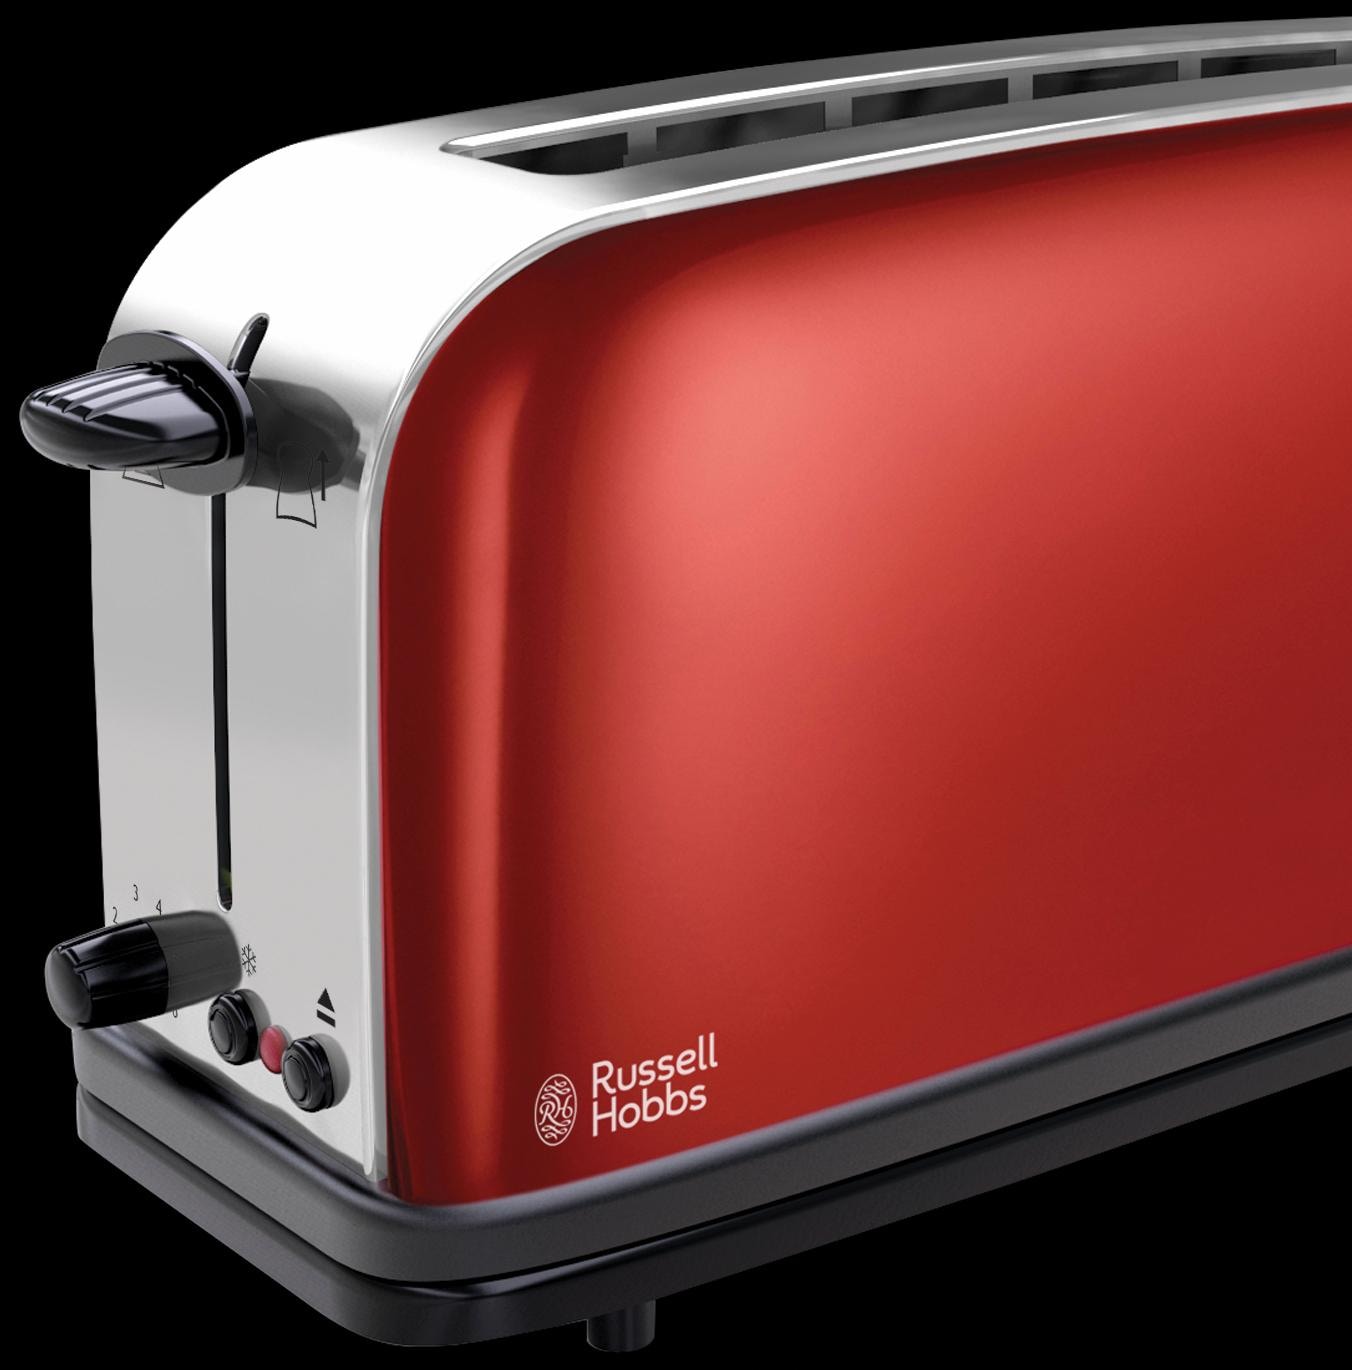 RUSSELL HOBBS Toaster »Colours Plus+ Flame Red 21391-56«, 1 langer Schlitz, 1000 W